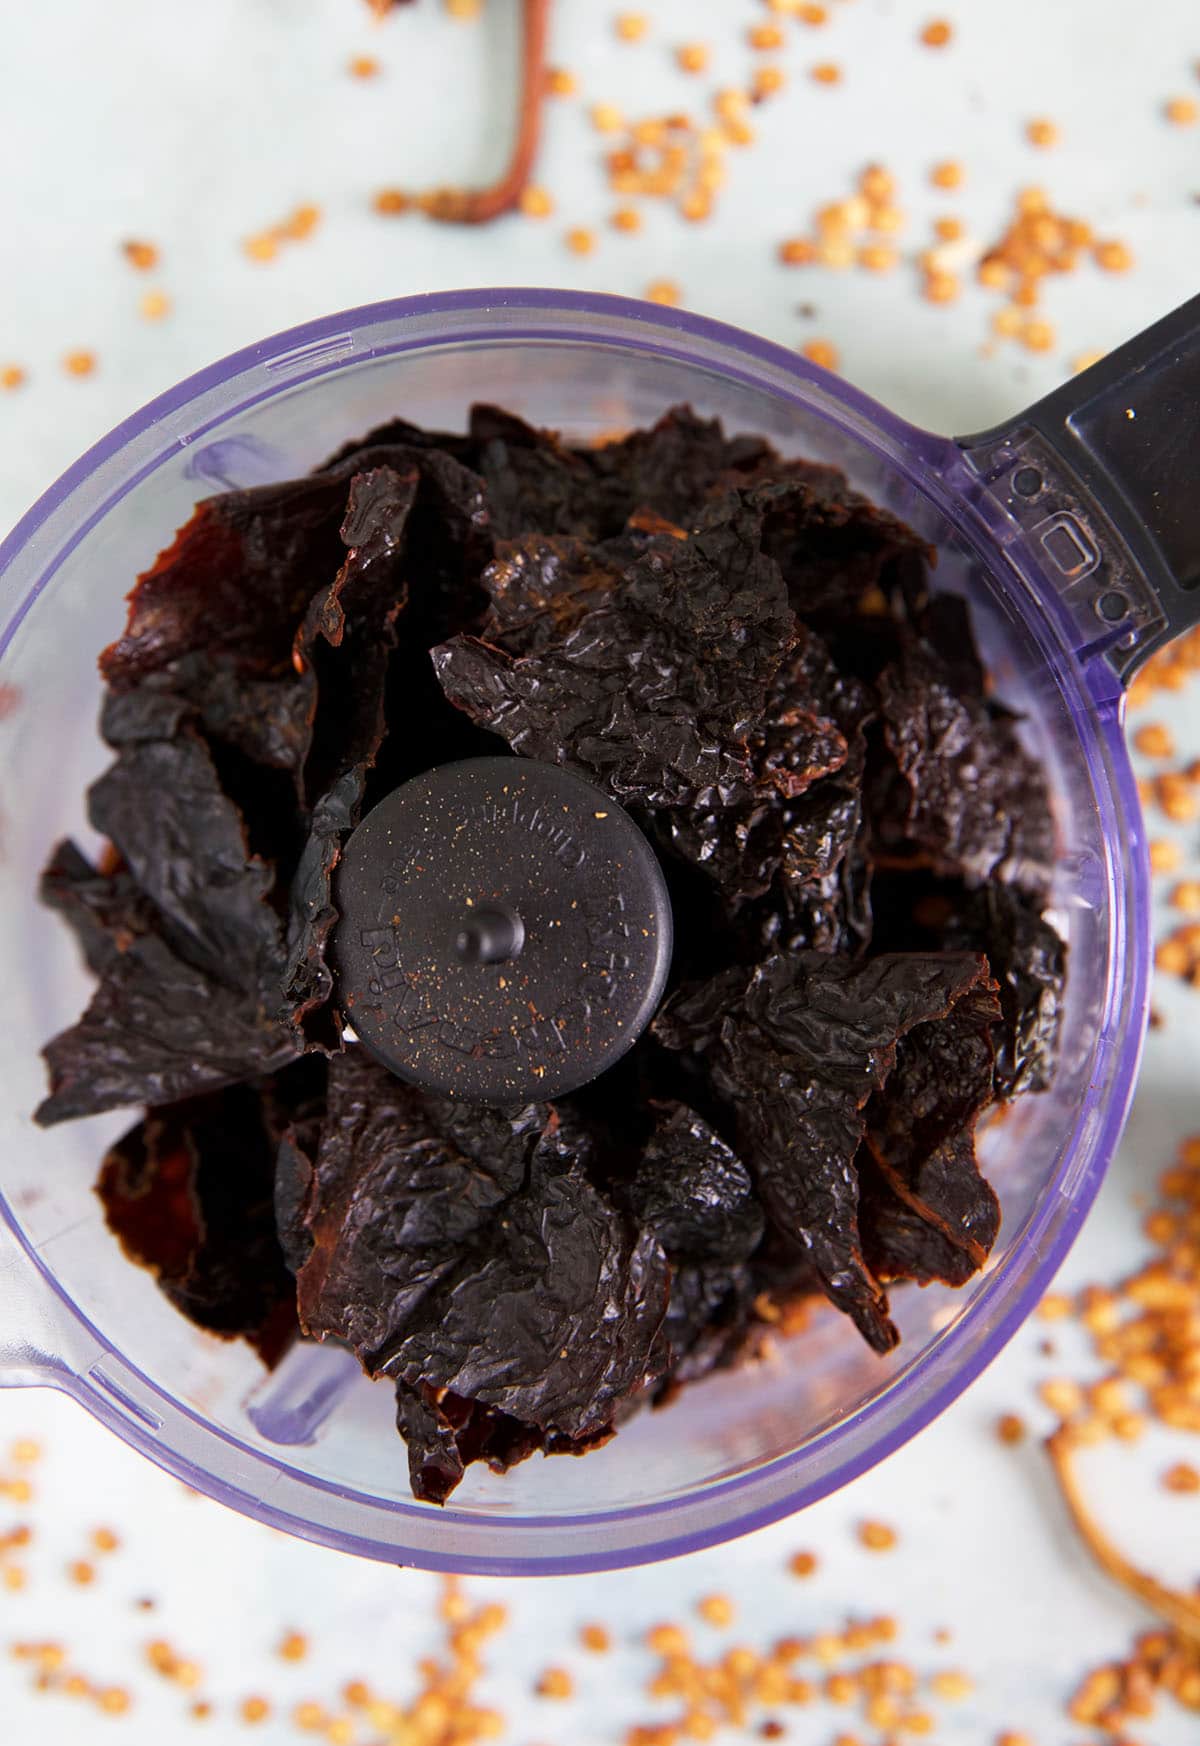 Ancho chilis are placed in a food processor.